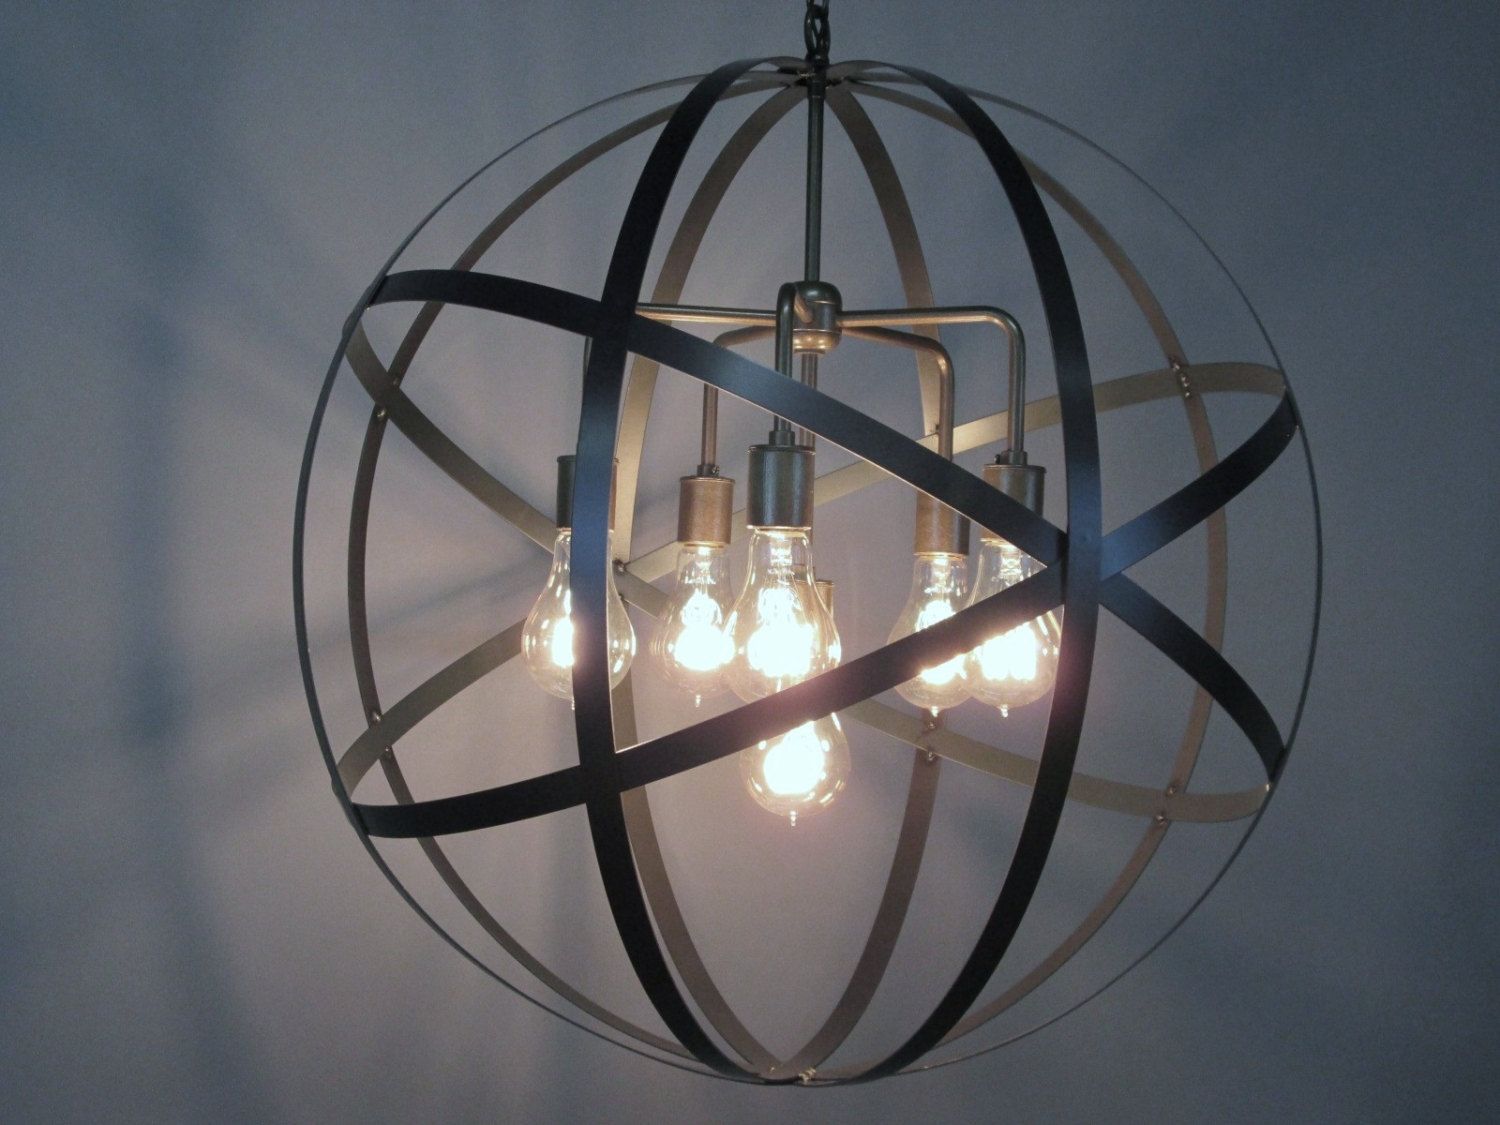 Accessories Home Interior Design And Decor With Sphere Chandelier Pertaining To Metal Sphere Chandelier (View 9 of 12)